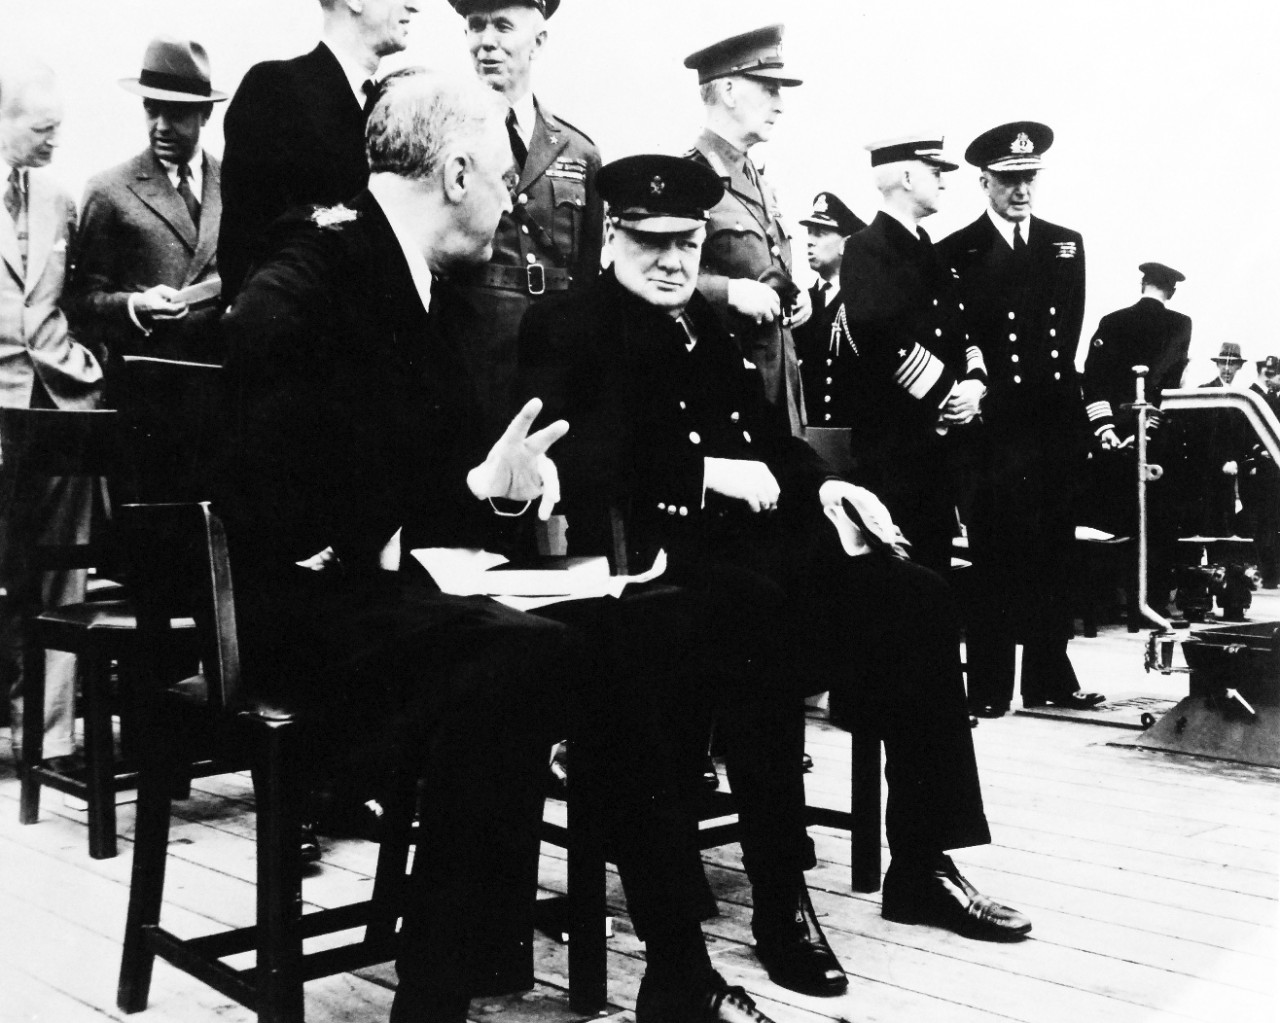 80-G-26860: Atlantic Charter, August 1941.  President Franklin D. Roosevelt and Prime Minister Winston S. Churchill and high-ranking naval and military men of both nations following divine services onboard Royal Navy battleship HMS Prince of Wales during the Atlantic Charter.  Standing left to right:  Harry Hopkins; Averill H. Harriman; Admiral Ernest J. King; General George C. Marshall; Rear Admiral Ross T. McIntire; General Sir John Dill; Captain John R. Beardall; Admiral Harold R. Stark; Admiral Sir Dudley Pound.  Photograph released August 10, 1941.   Official U.S. Navy Photograph, now in the collections of the National Archives.  (2016/03/22).